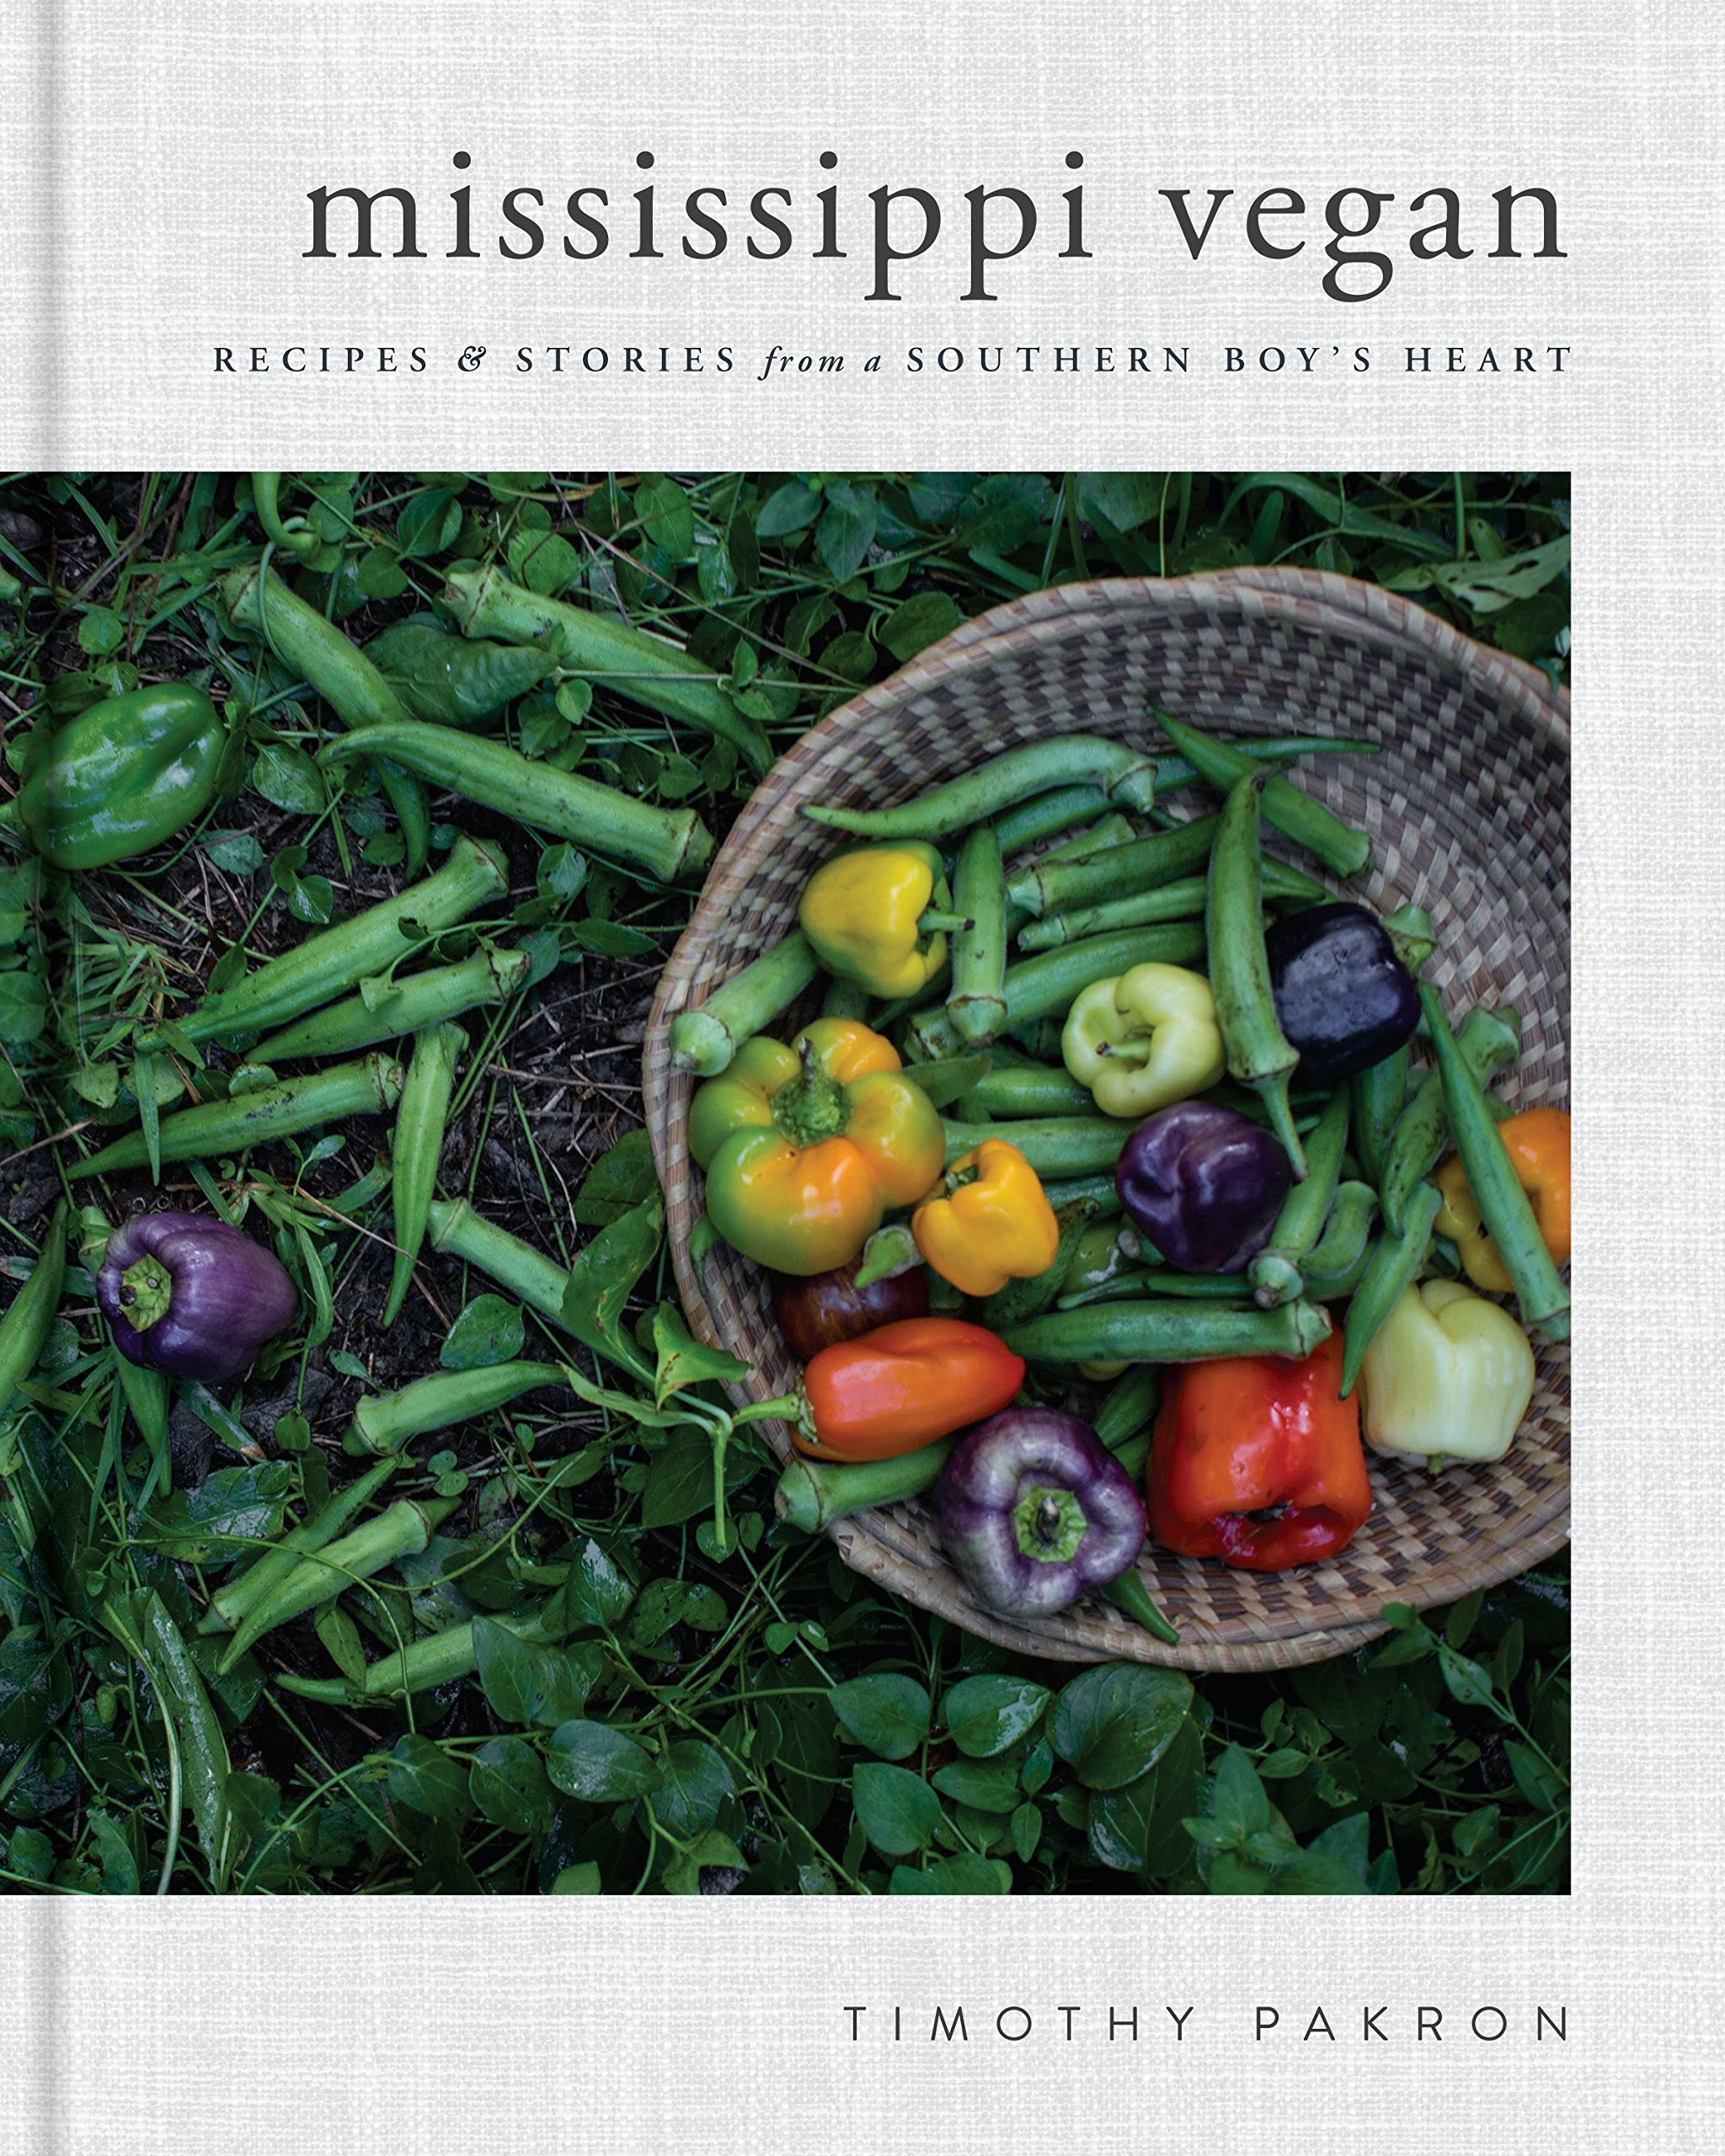 Mississippi Vegan: Recipes and Stories from a Southern Boy's Heart (Timothy Pakron)